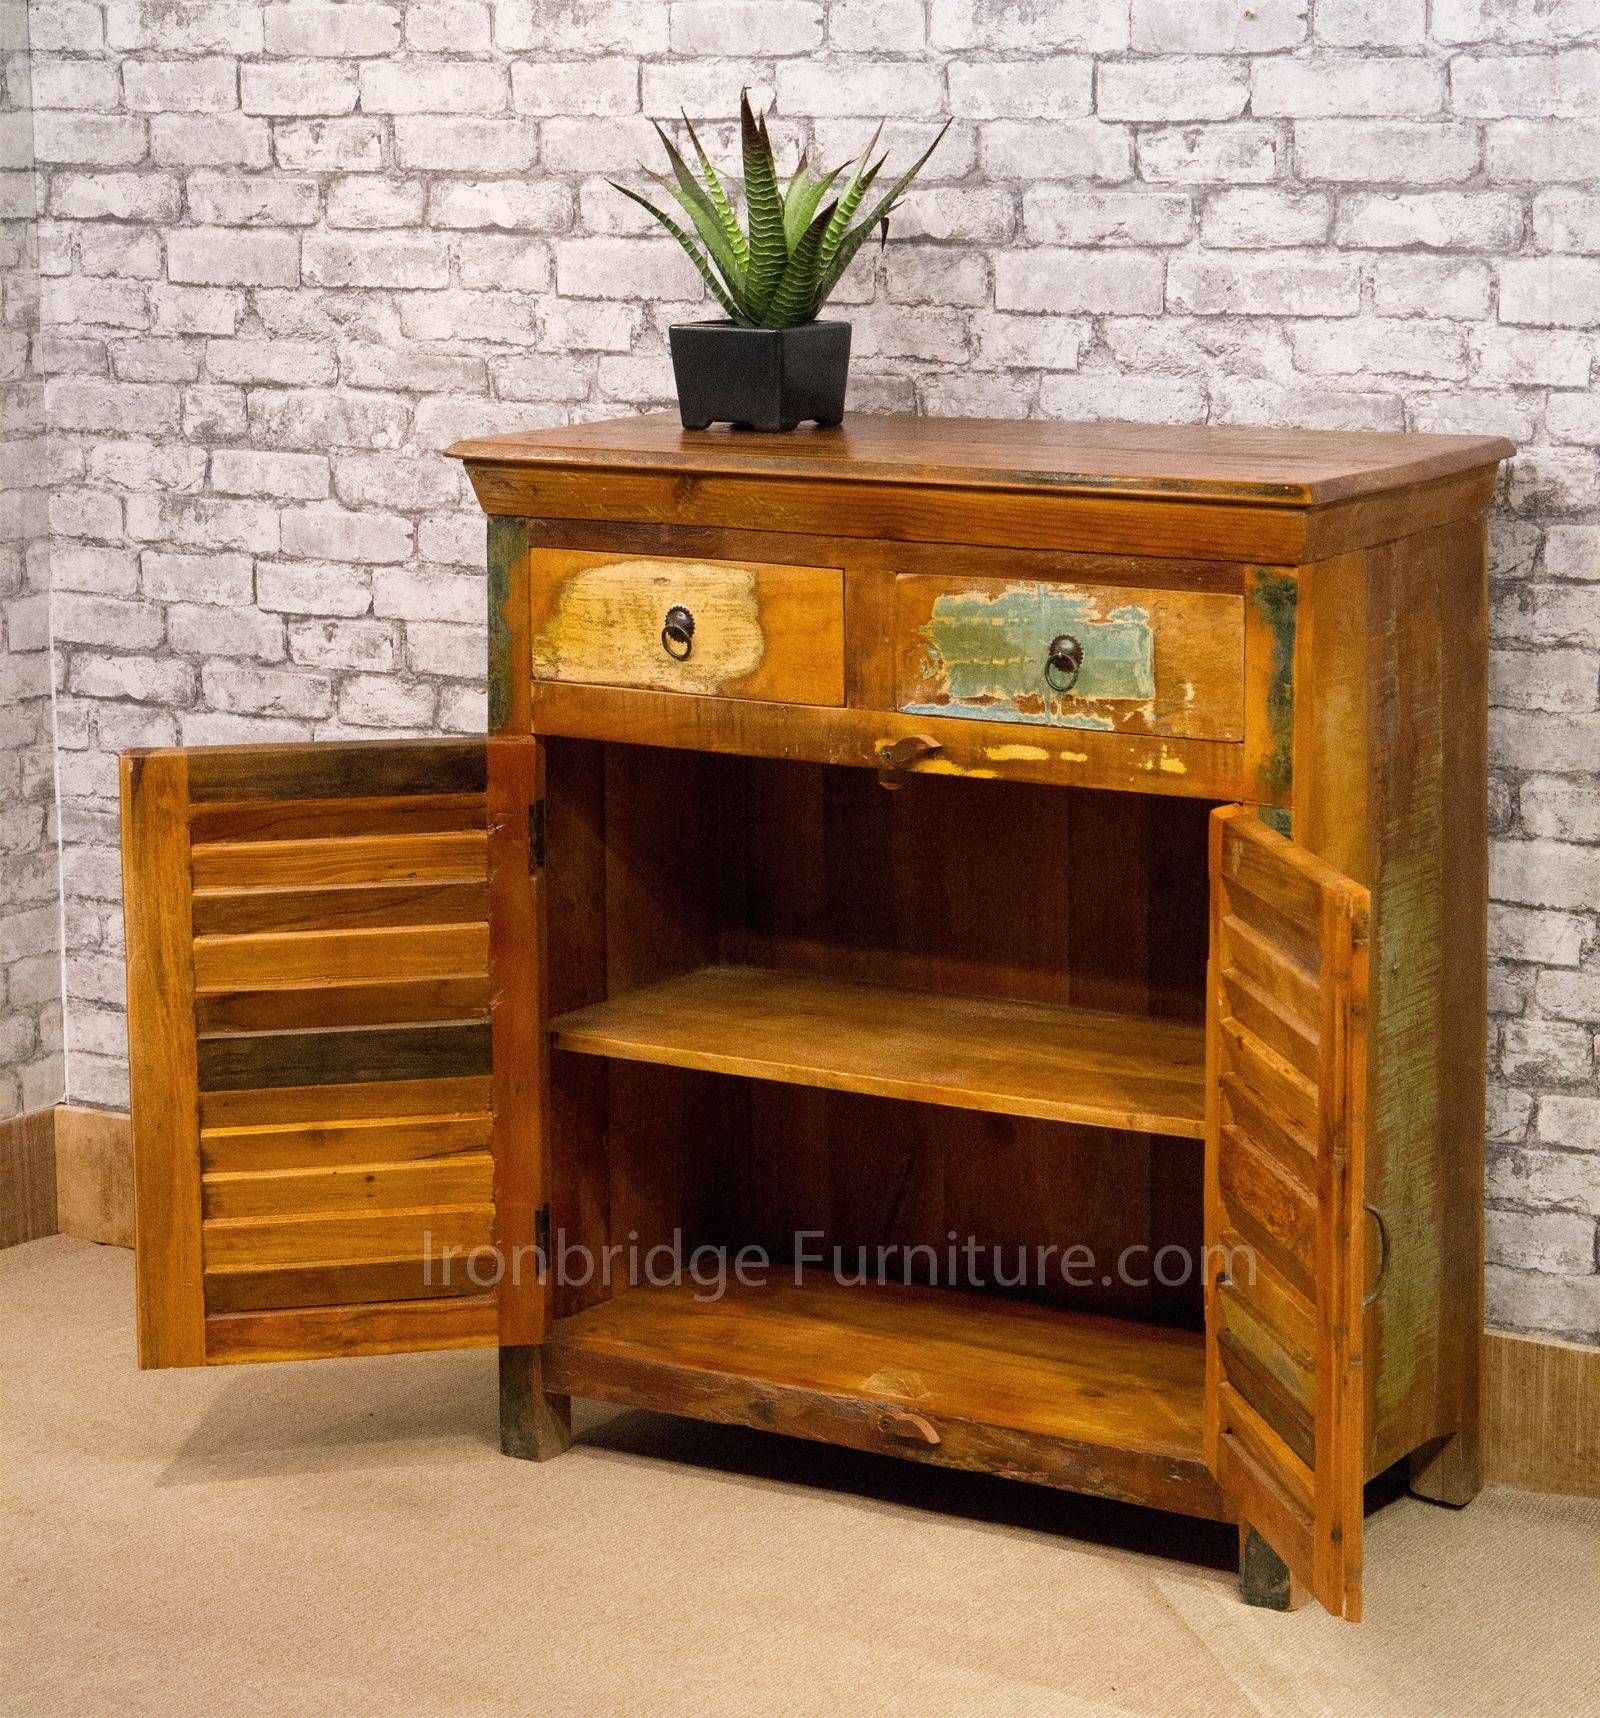 Vintage Style Double Sideboard Vtsb 01 Throughout Retro Sideboards (View 22 of 30)